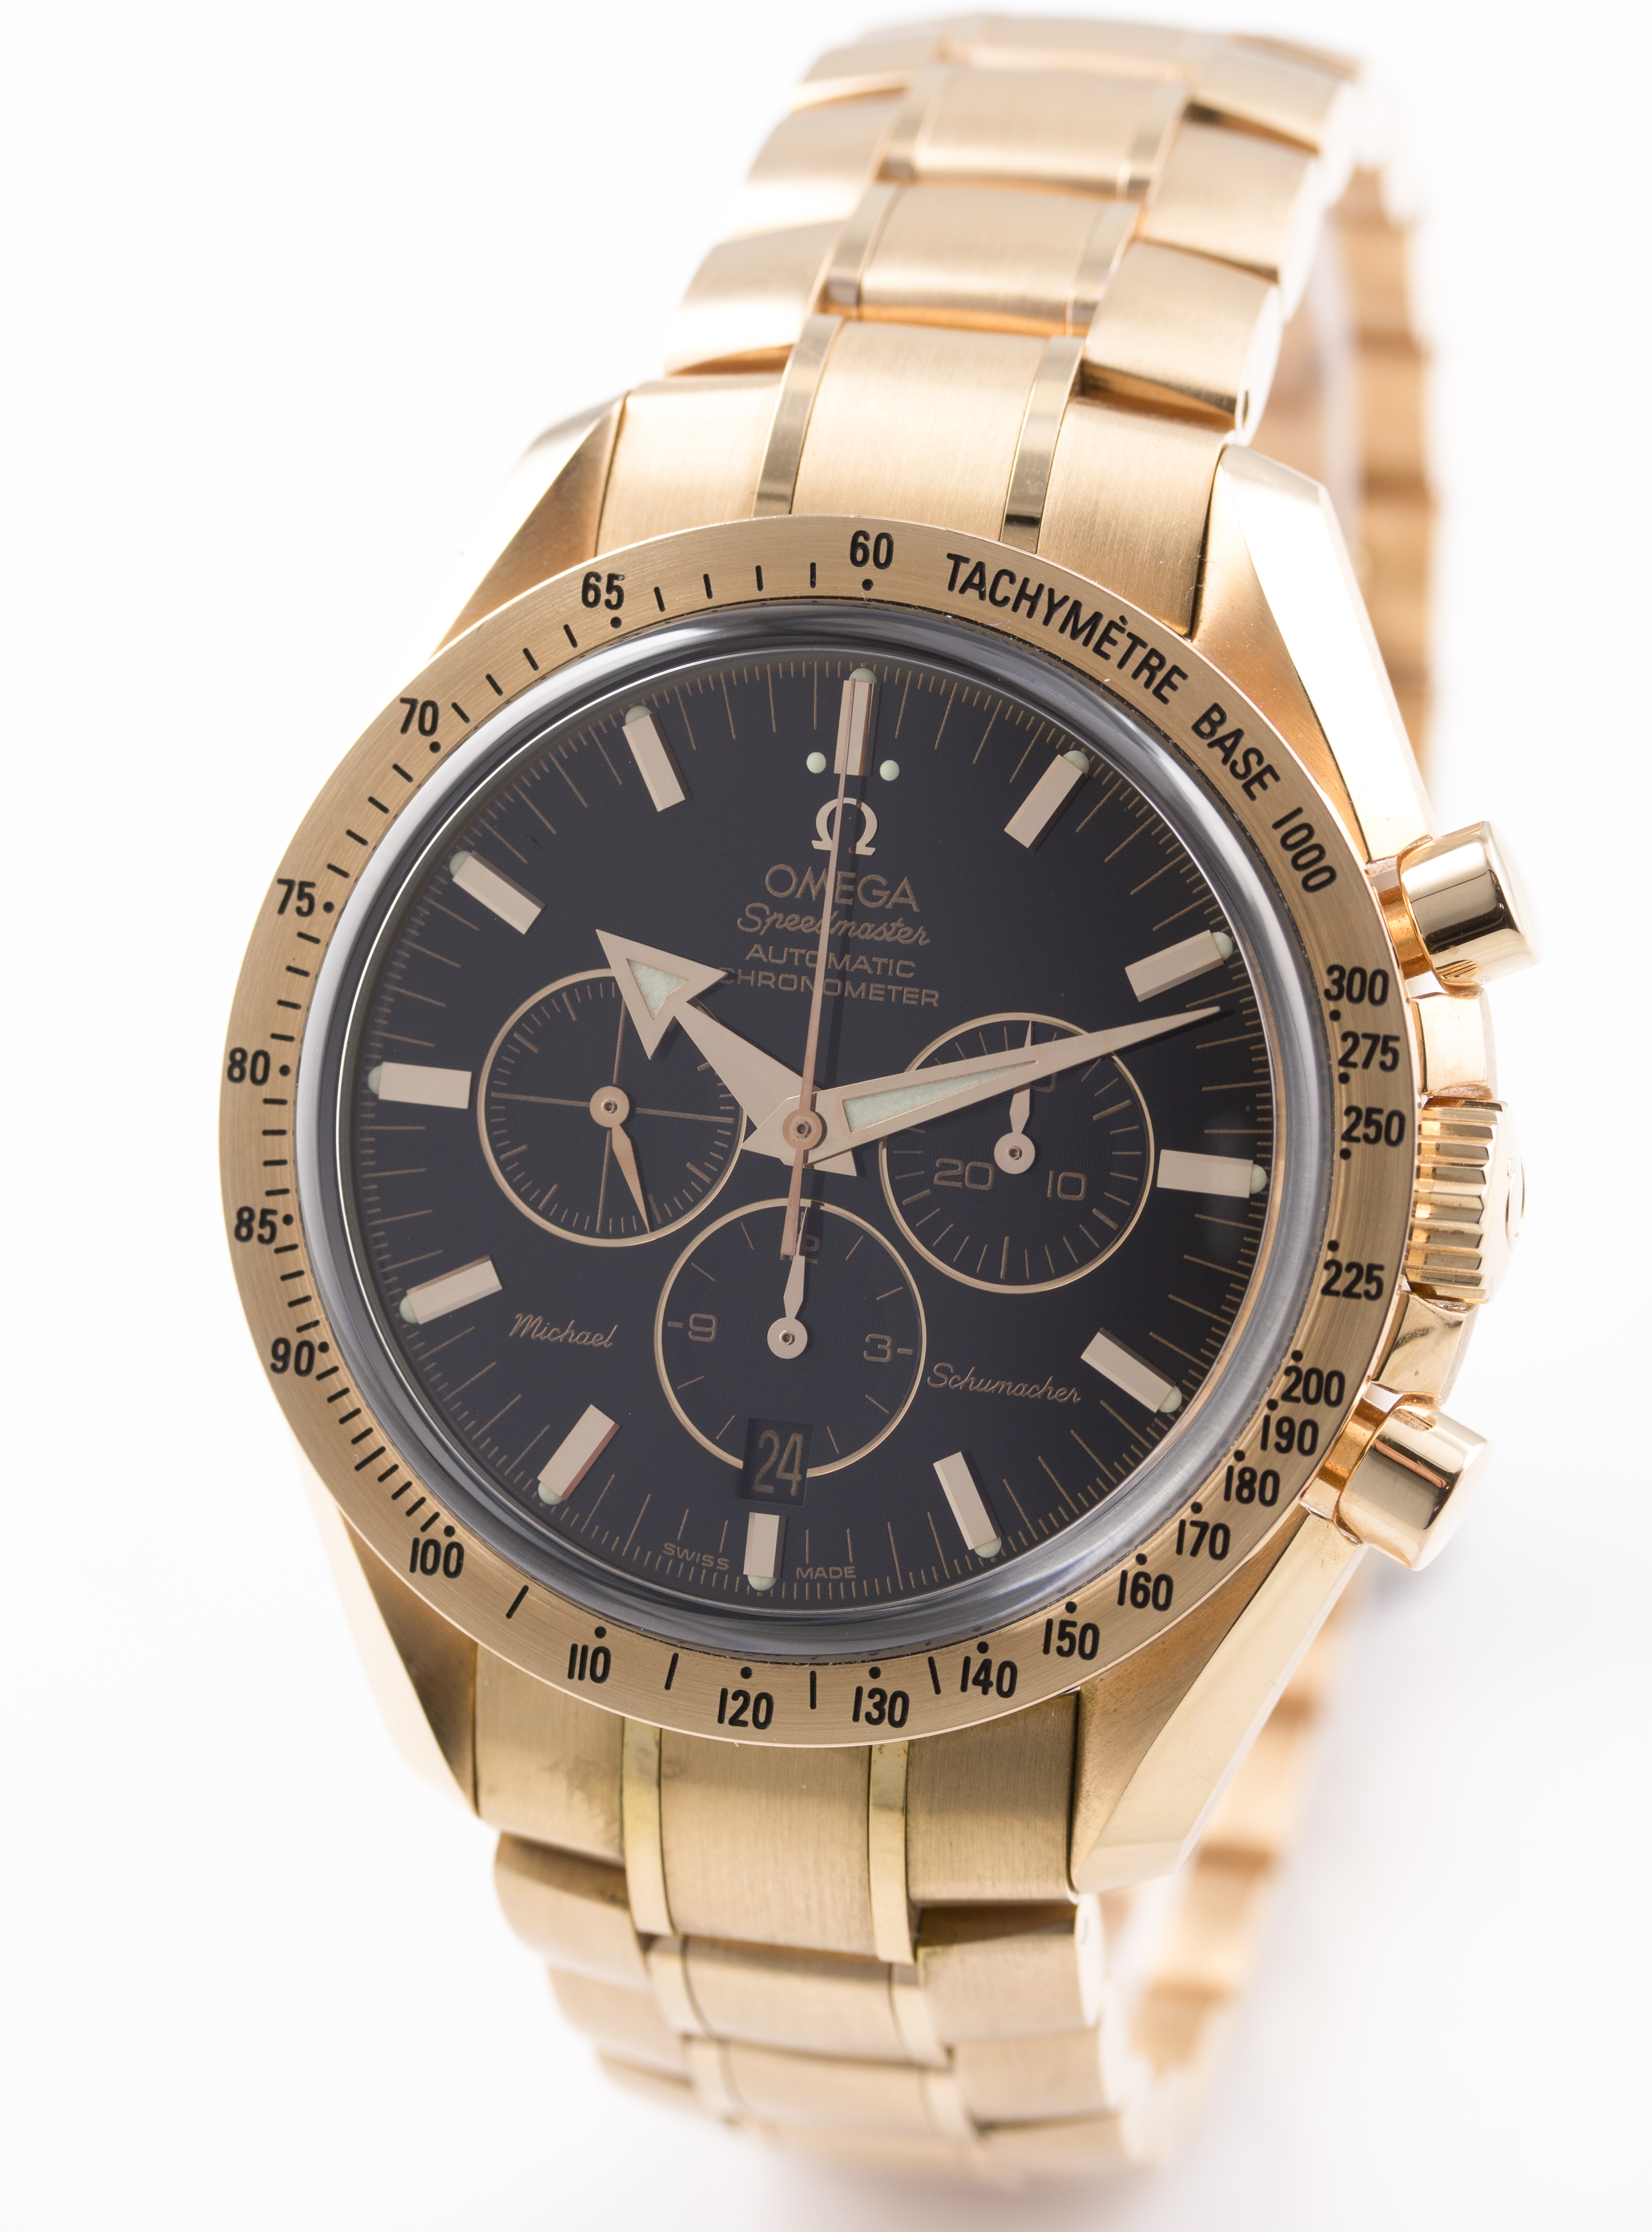 A FINE & RARE GENTLEMAN'S 18K ROSE GOLD OMEGA SPEEDMASTER AUTOMATIC CHRONOGRAPH BRACELET WATCH DATED - Image 3 of 8